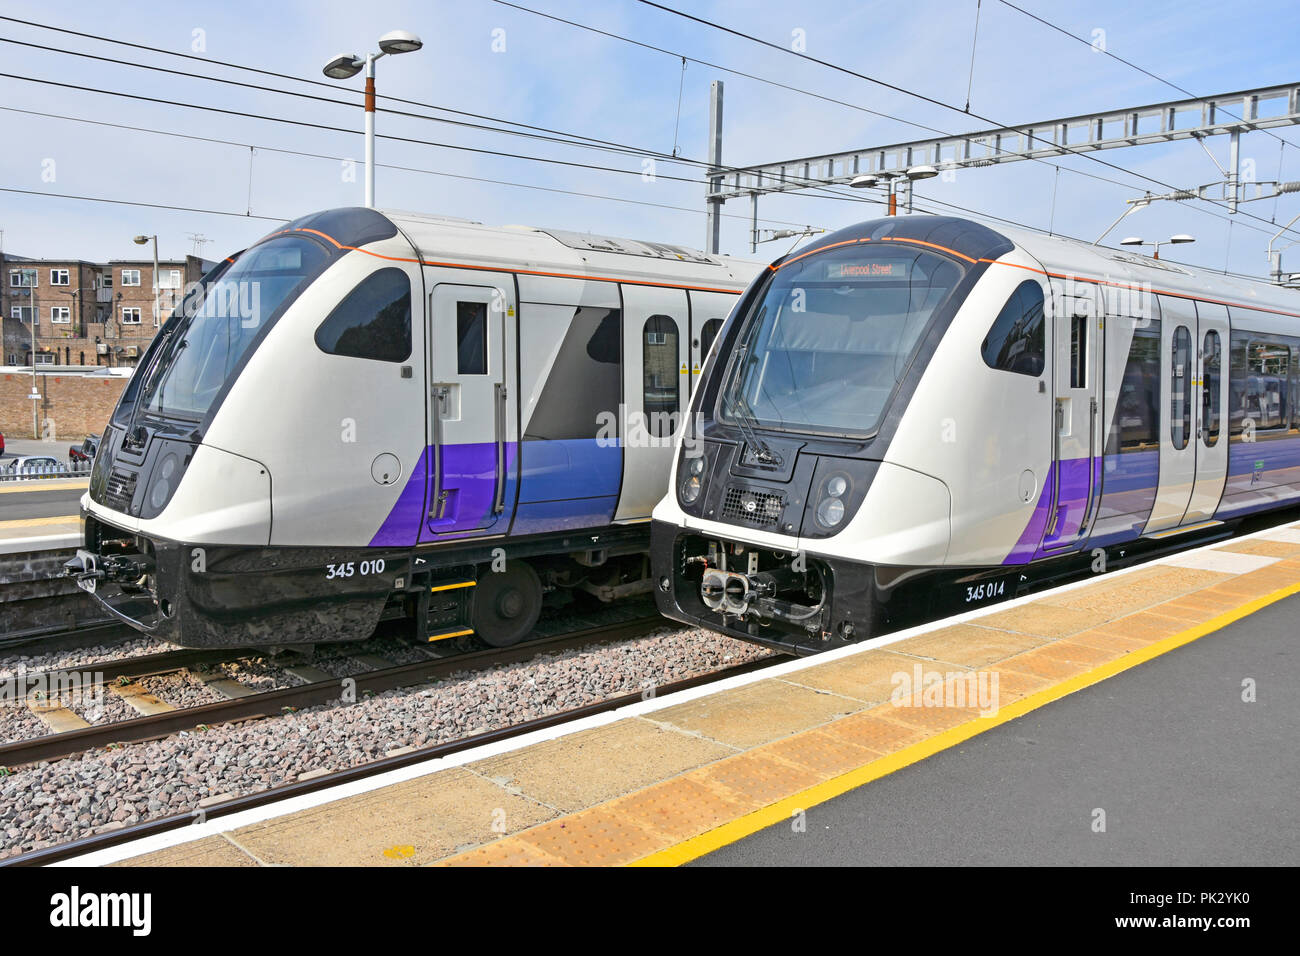 Front of two tfl Crossrail class 345 Elizabeth Line trains stop at Shenfield station Essex waiting to go back to London Liverpool Street England UK Stock Photo